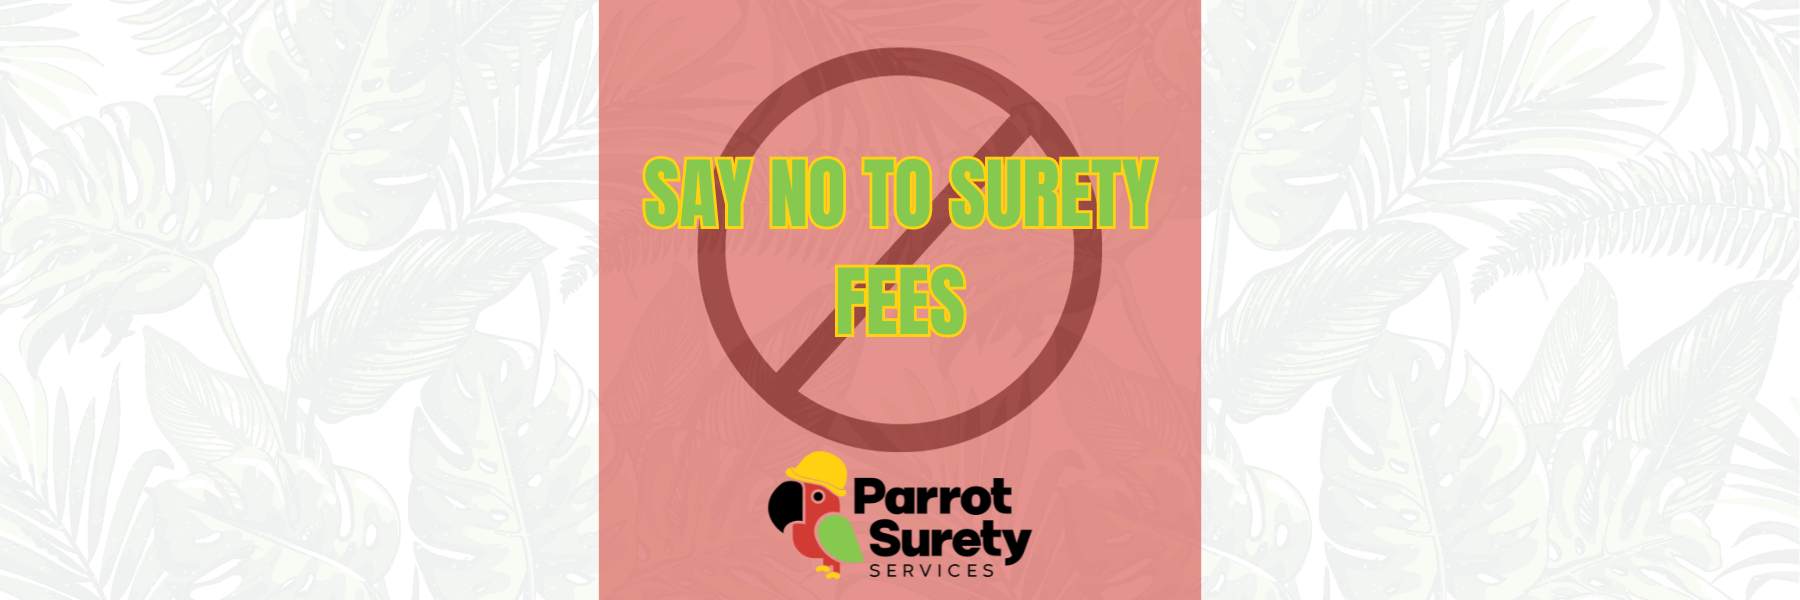 Say NO to Surety Fees title image